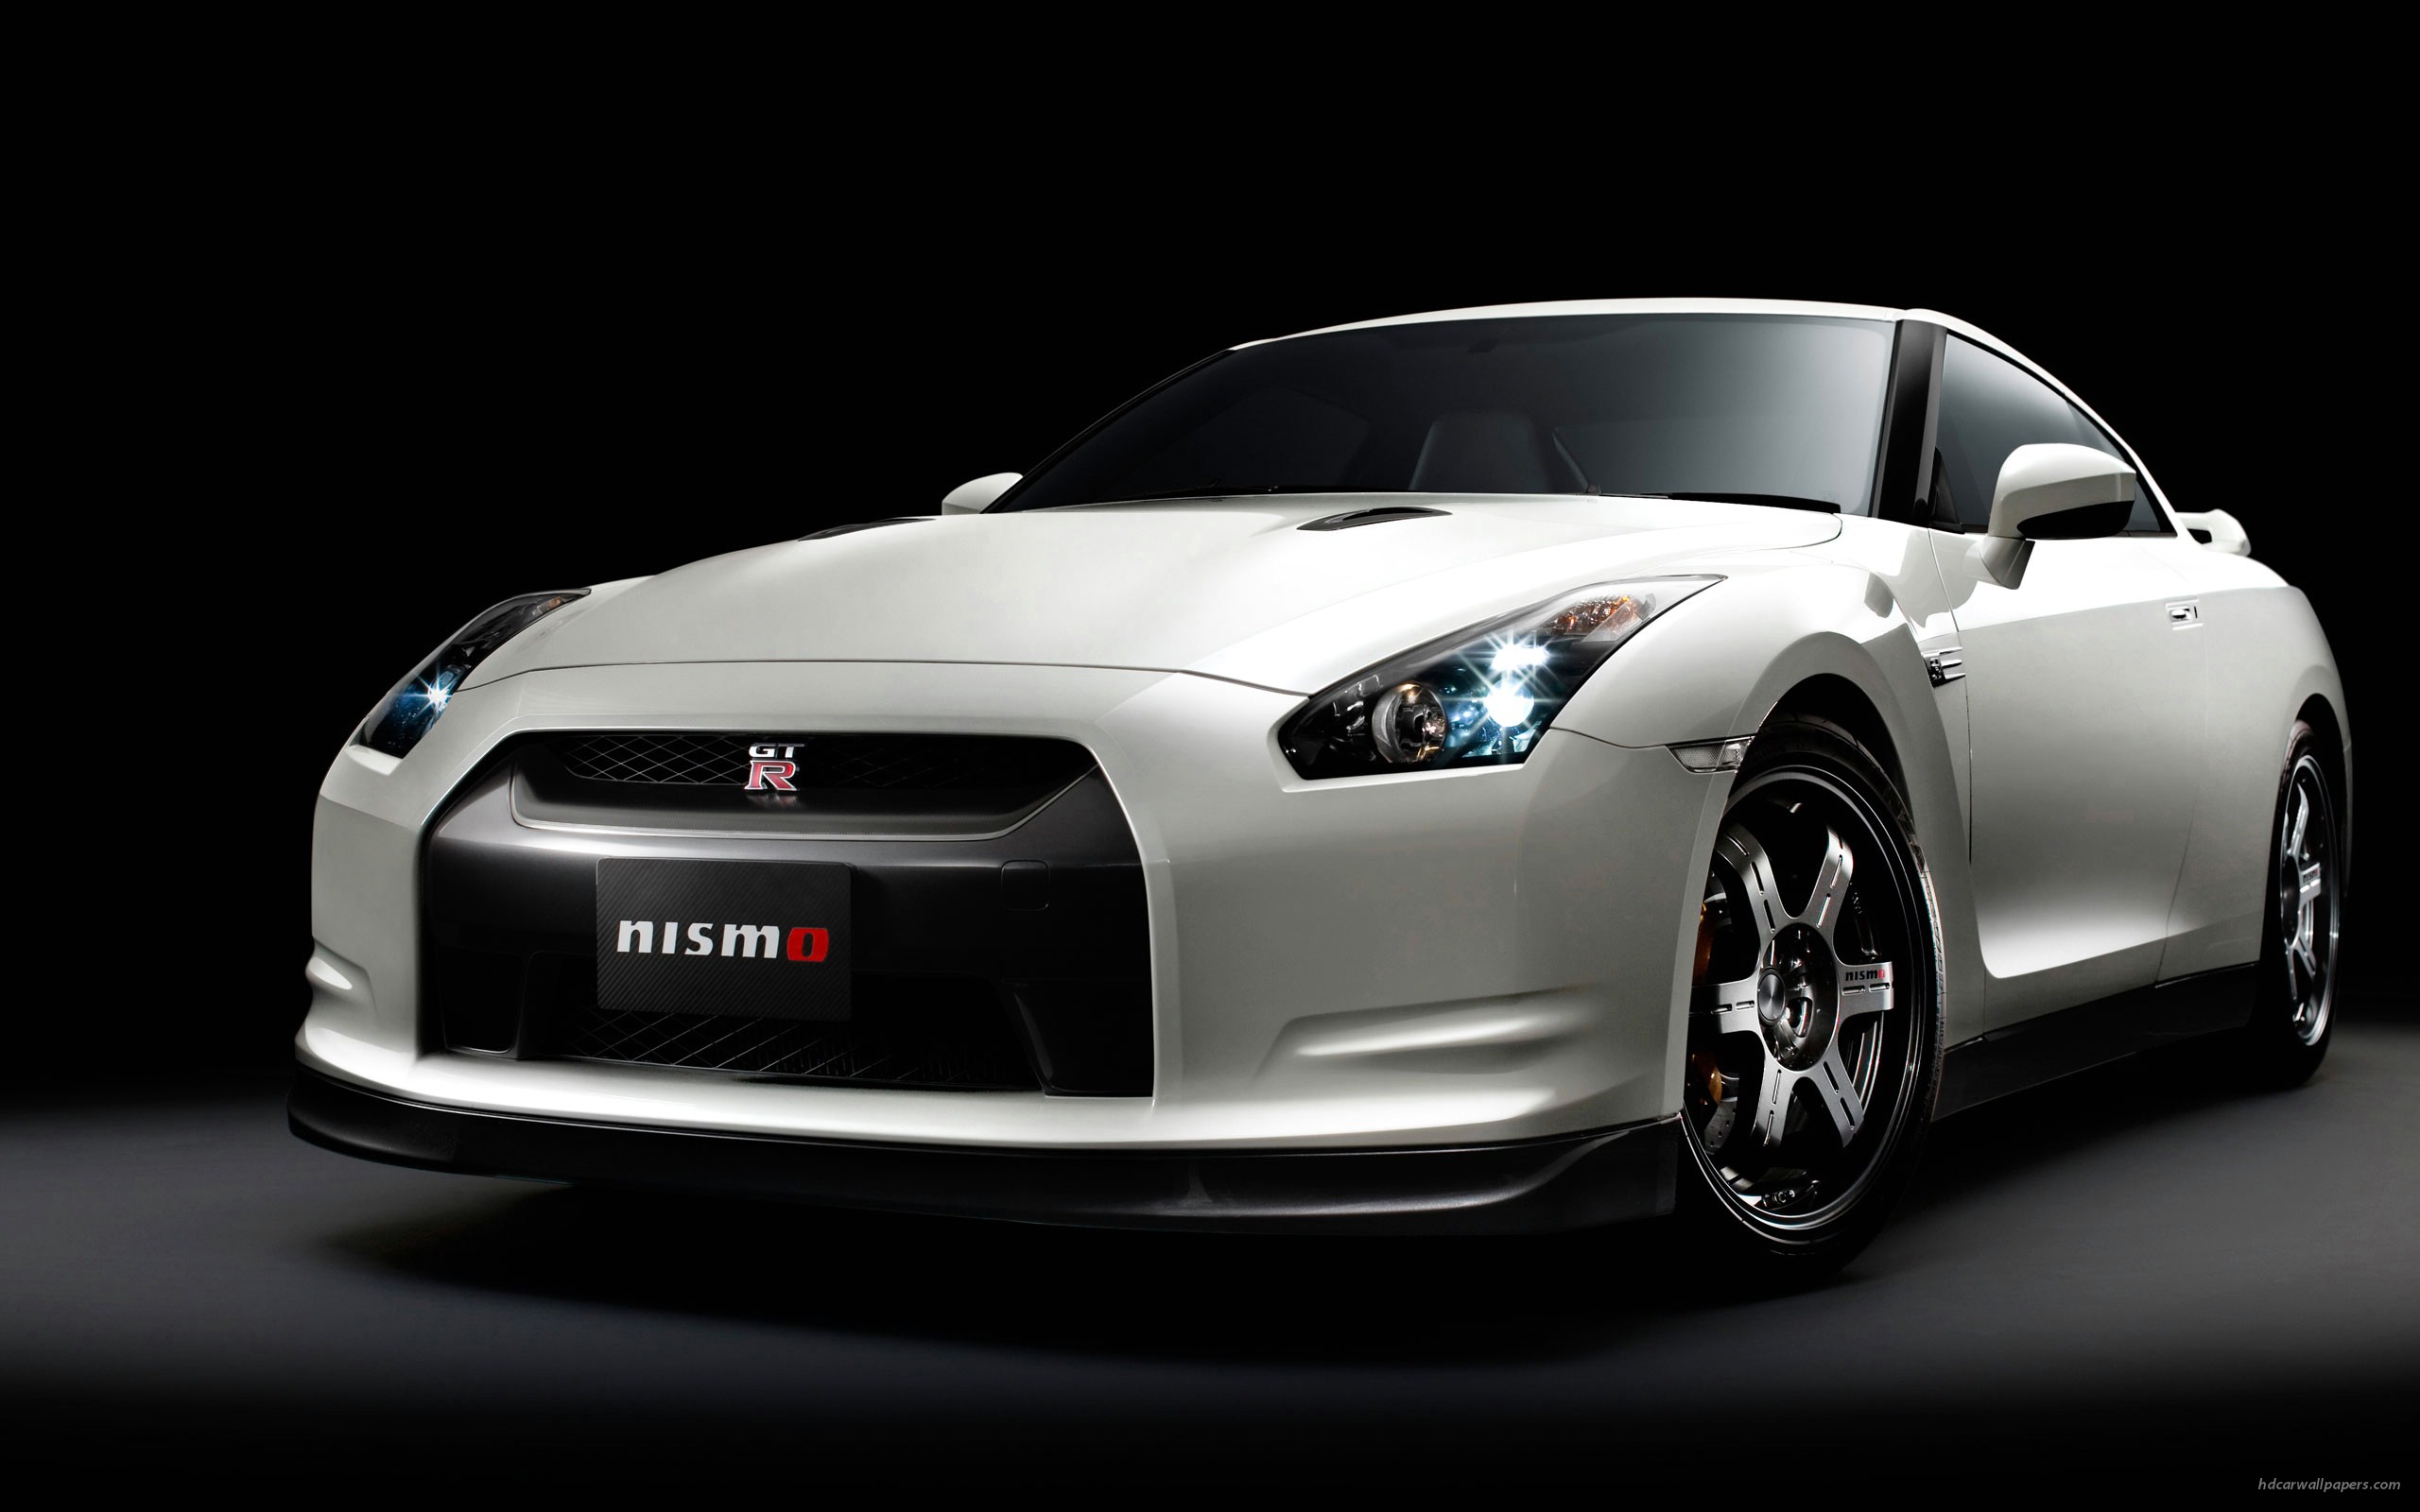 Free Download Nissan Gt R Nismo Club Sports Wallpapers Hd Wallpapers 2560x1600 For Your Desktop Mobile Tablet Explore 46 Skyline Gt R Wallpaper Skyline Gt R Wallpaper Nissan Skyline